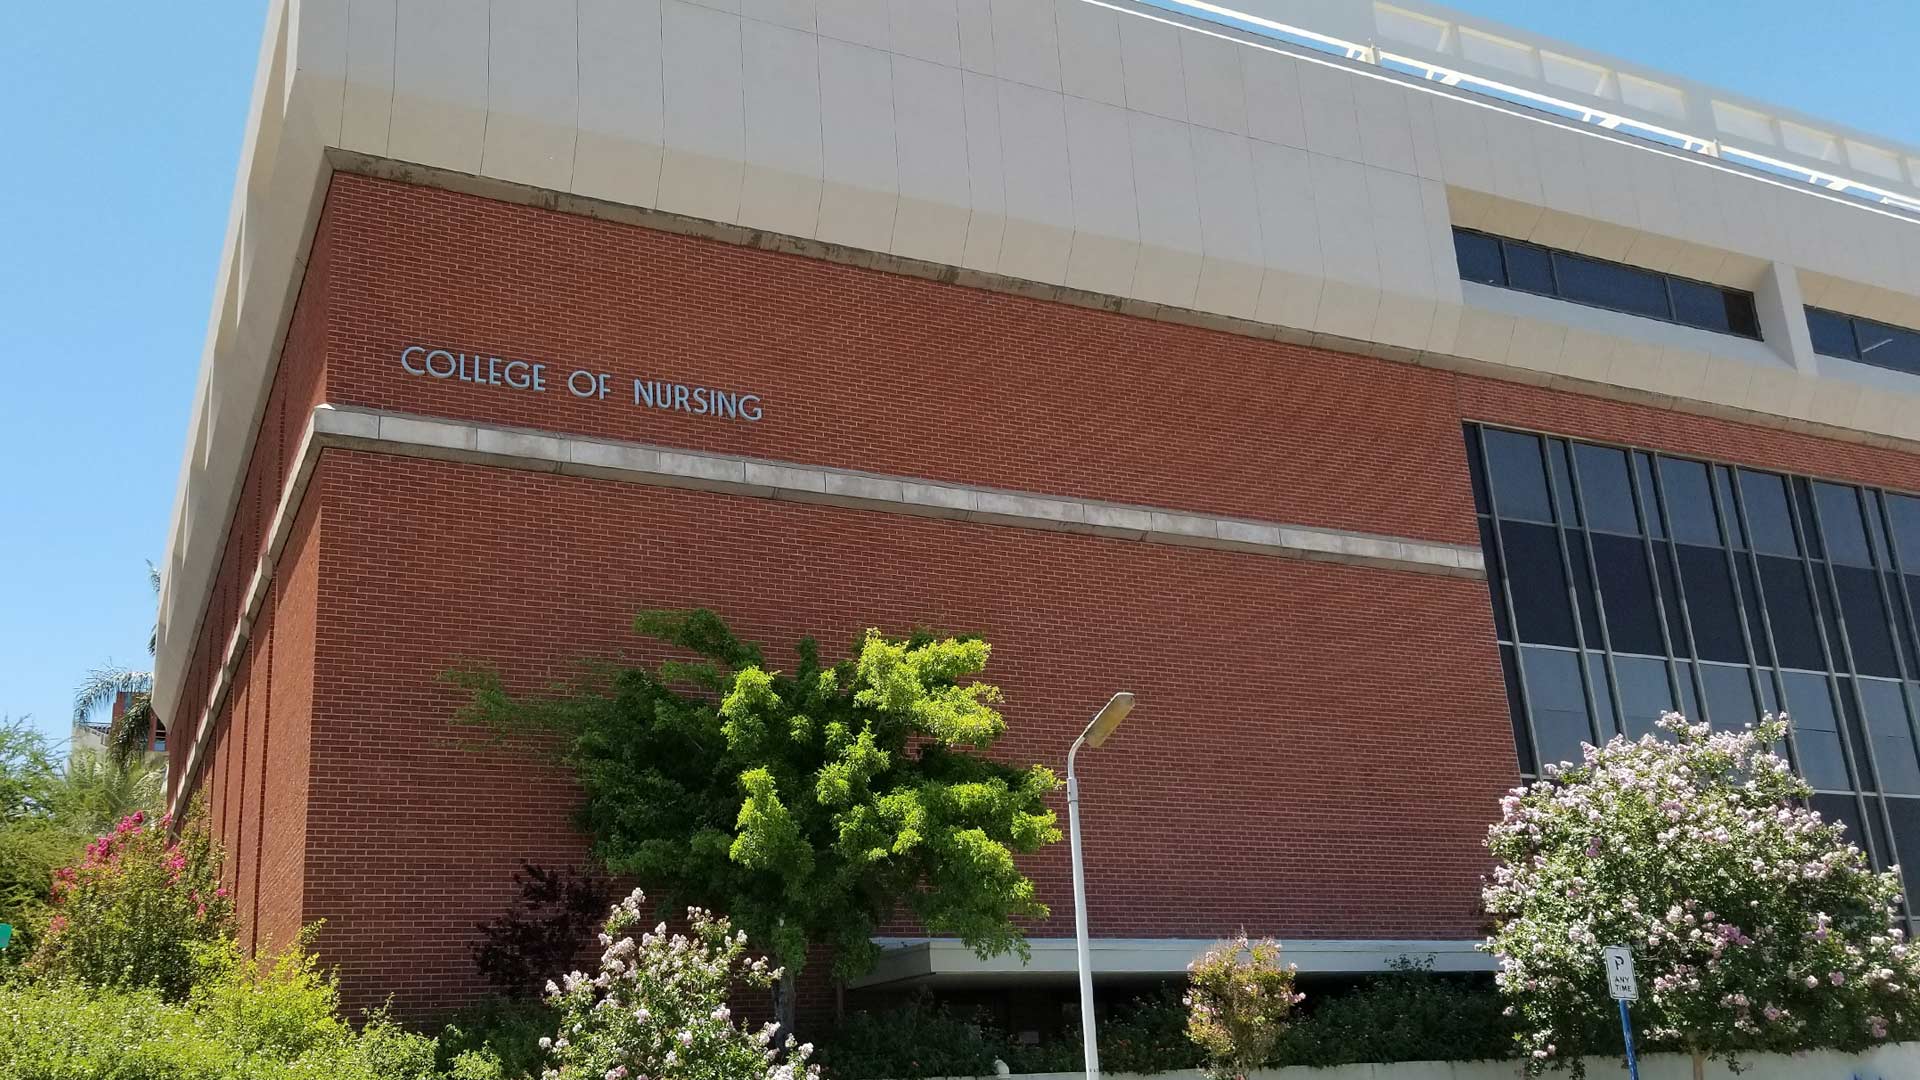 The east facade of the University of Arizona College of Nursing.